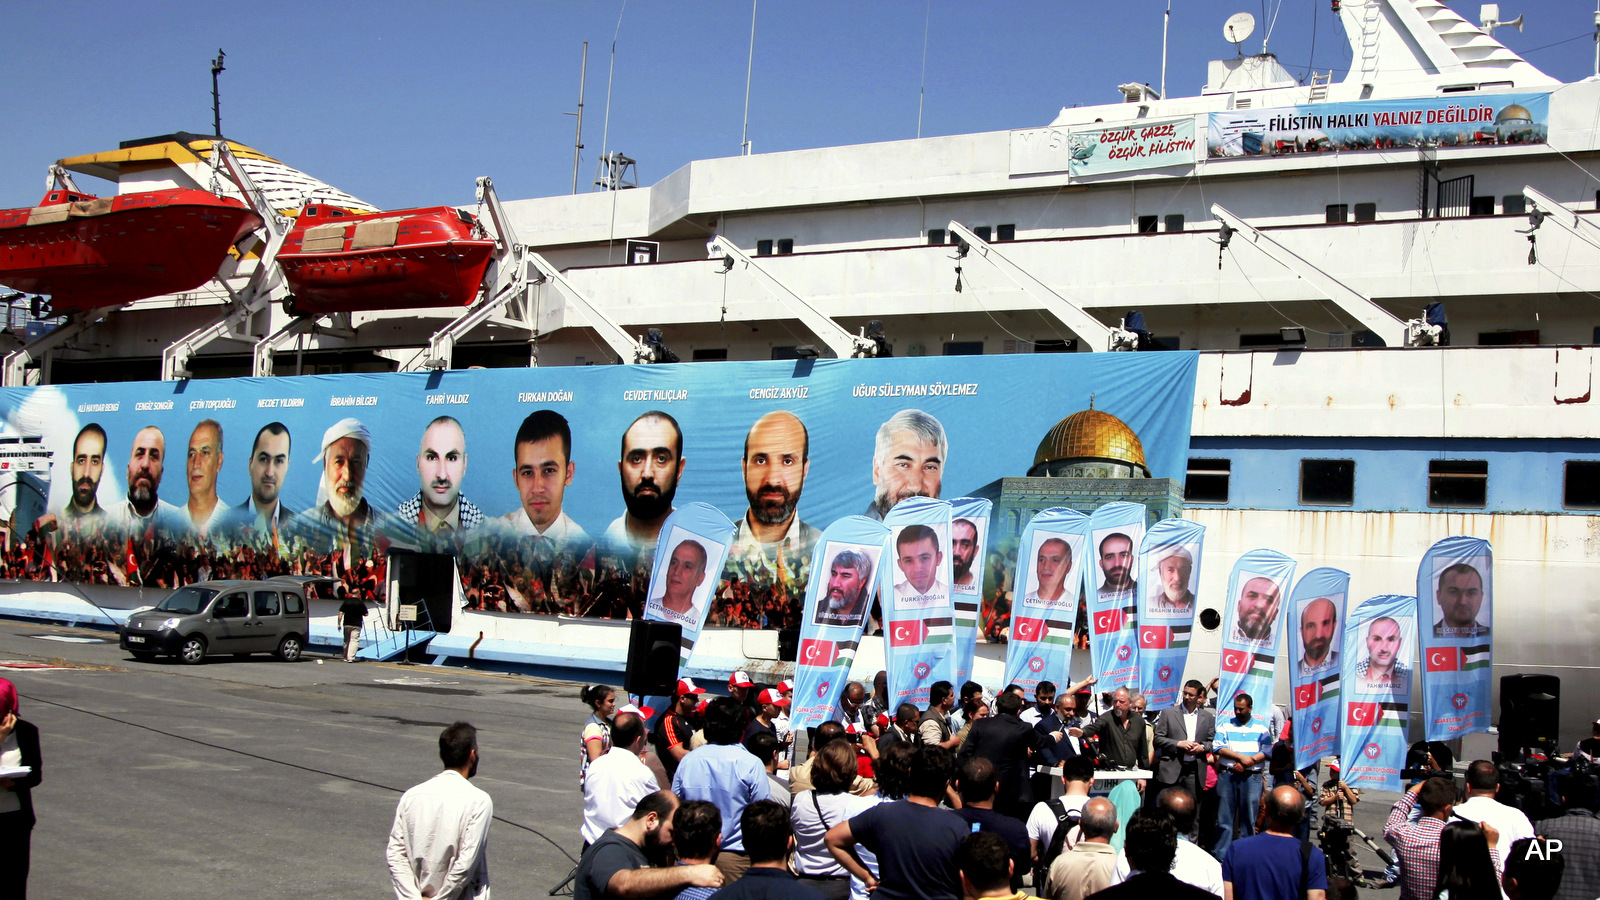 Turks gather in Istanbul, on the fourth anniversary of the Mavi Marmara ship, background, the lead boat of a flotilla headed to the Gaza Strip which was stormed by Israeli naval commandos in a predawn raid killing at least 9 passengers and wounding dozens more. Turkey's Prime Minister Binali Yildirim announced Monday, June 27, 2016, that Turkey and Israel have reached a deal to normalize ties after six years of strain.